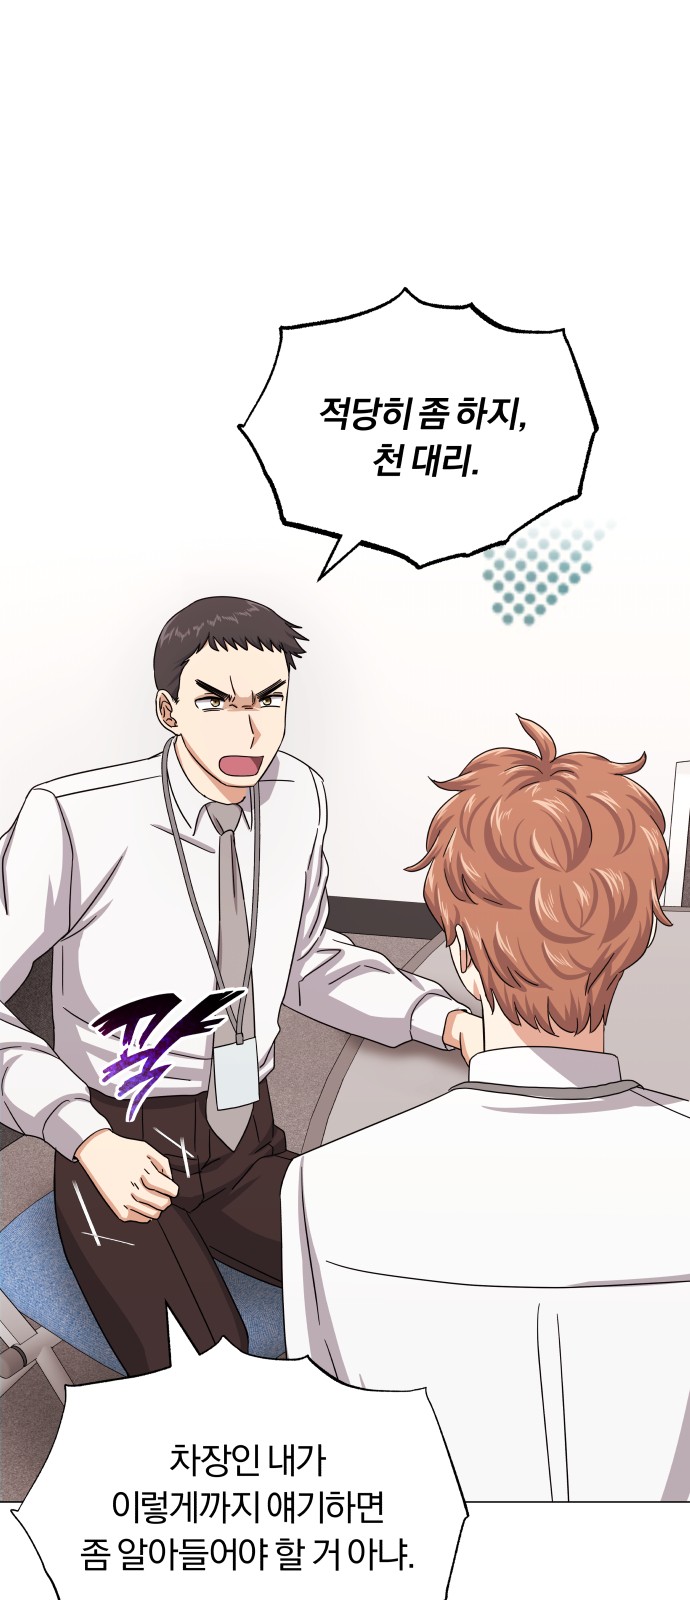 Superstar Cheon Dae-ri - Chapter 38 - Page 1